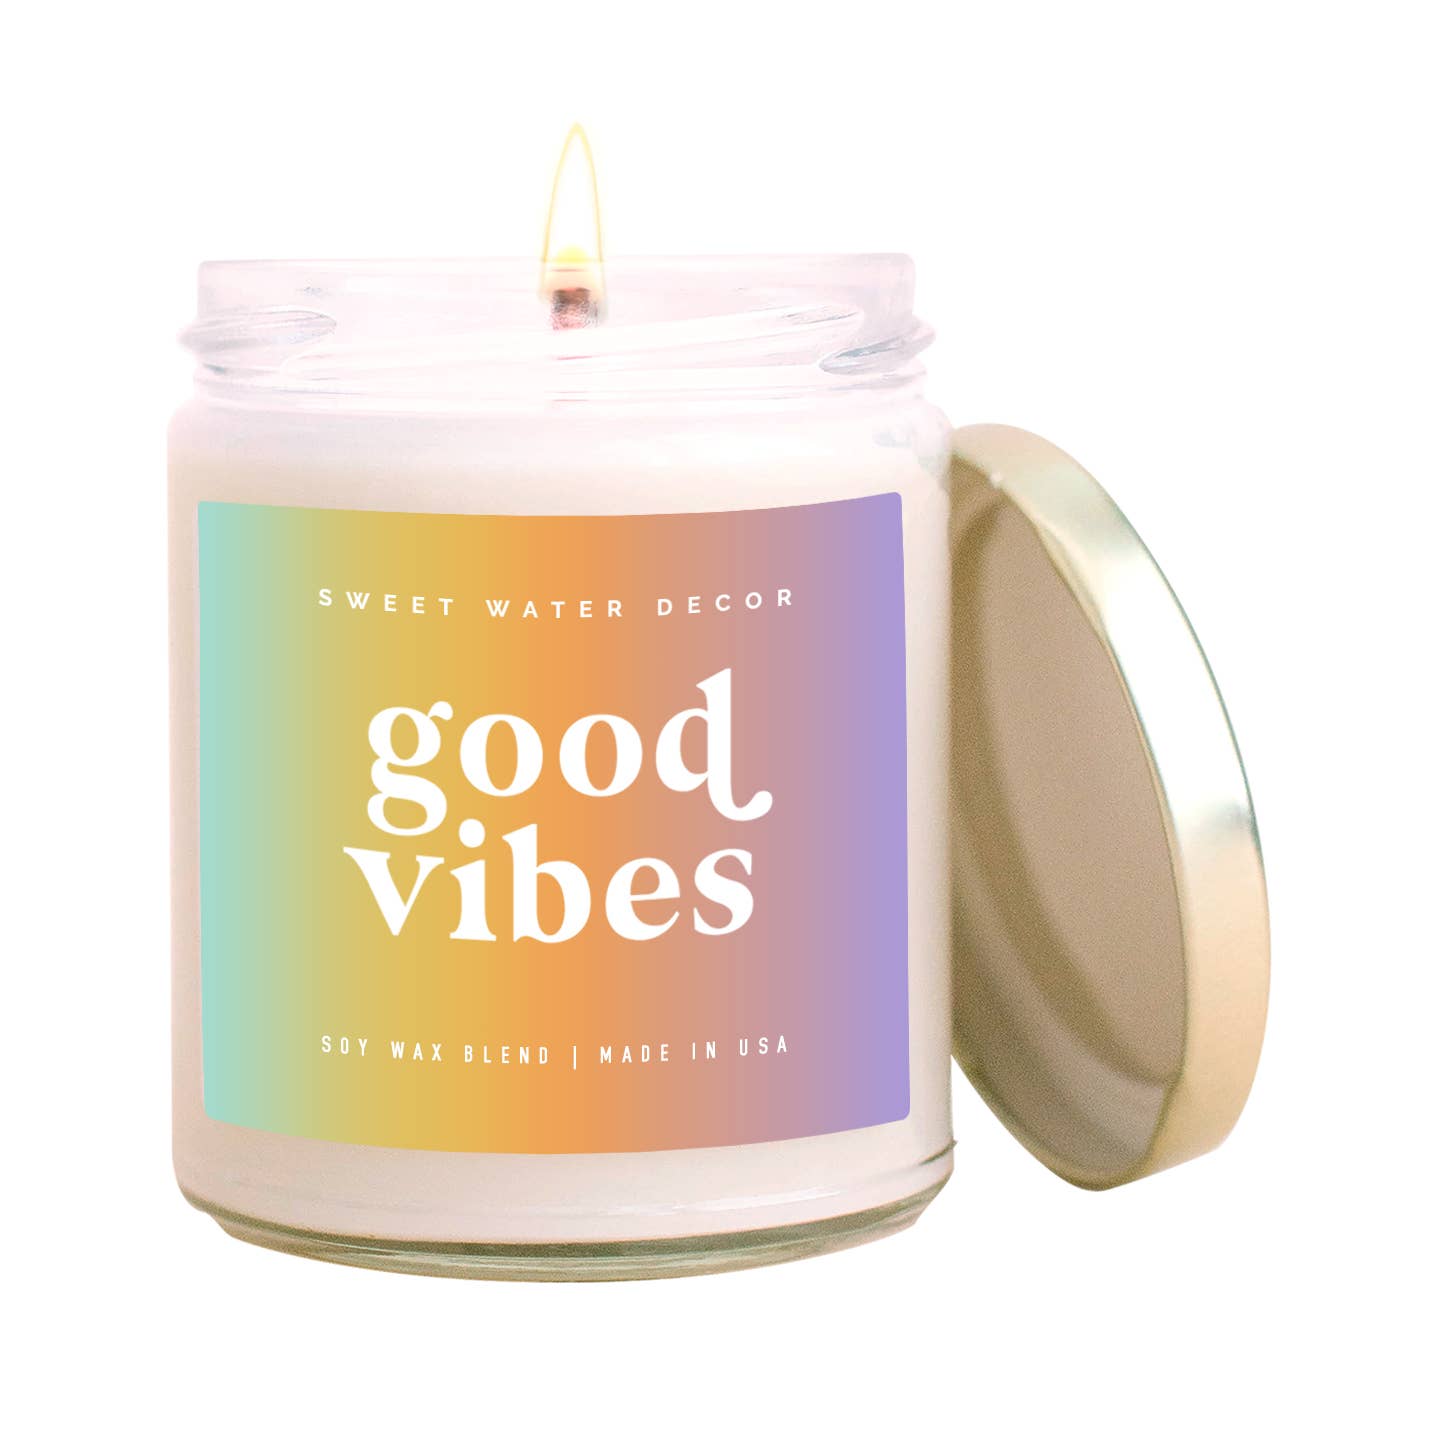 Sweet Water Decor - Good Vibes Soy Candle - Clear Jar - Rainbow - 9 oz